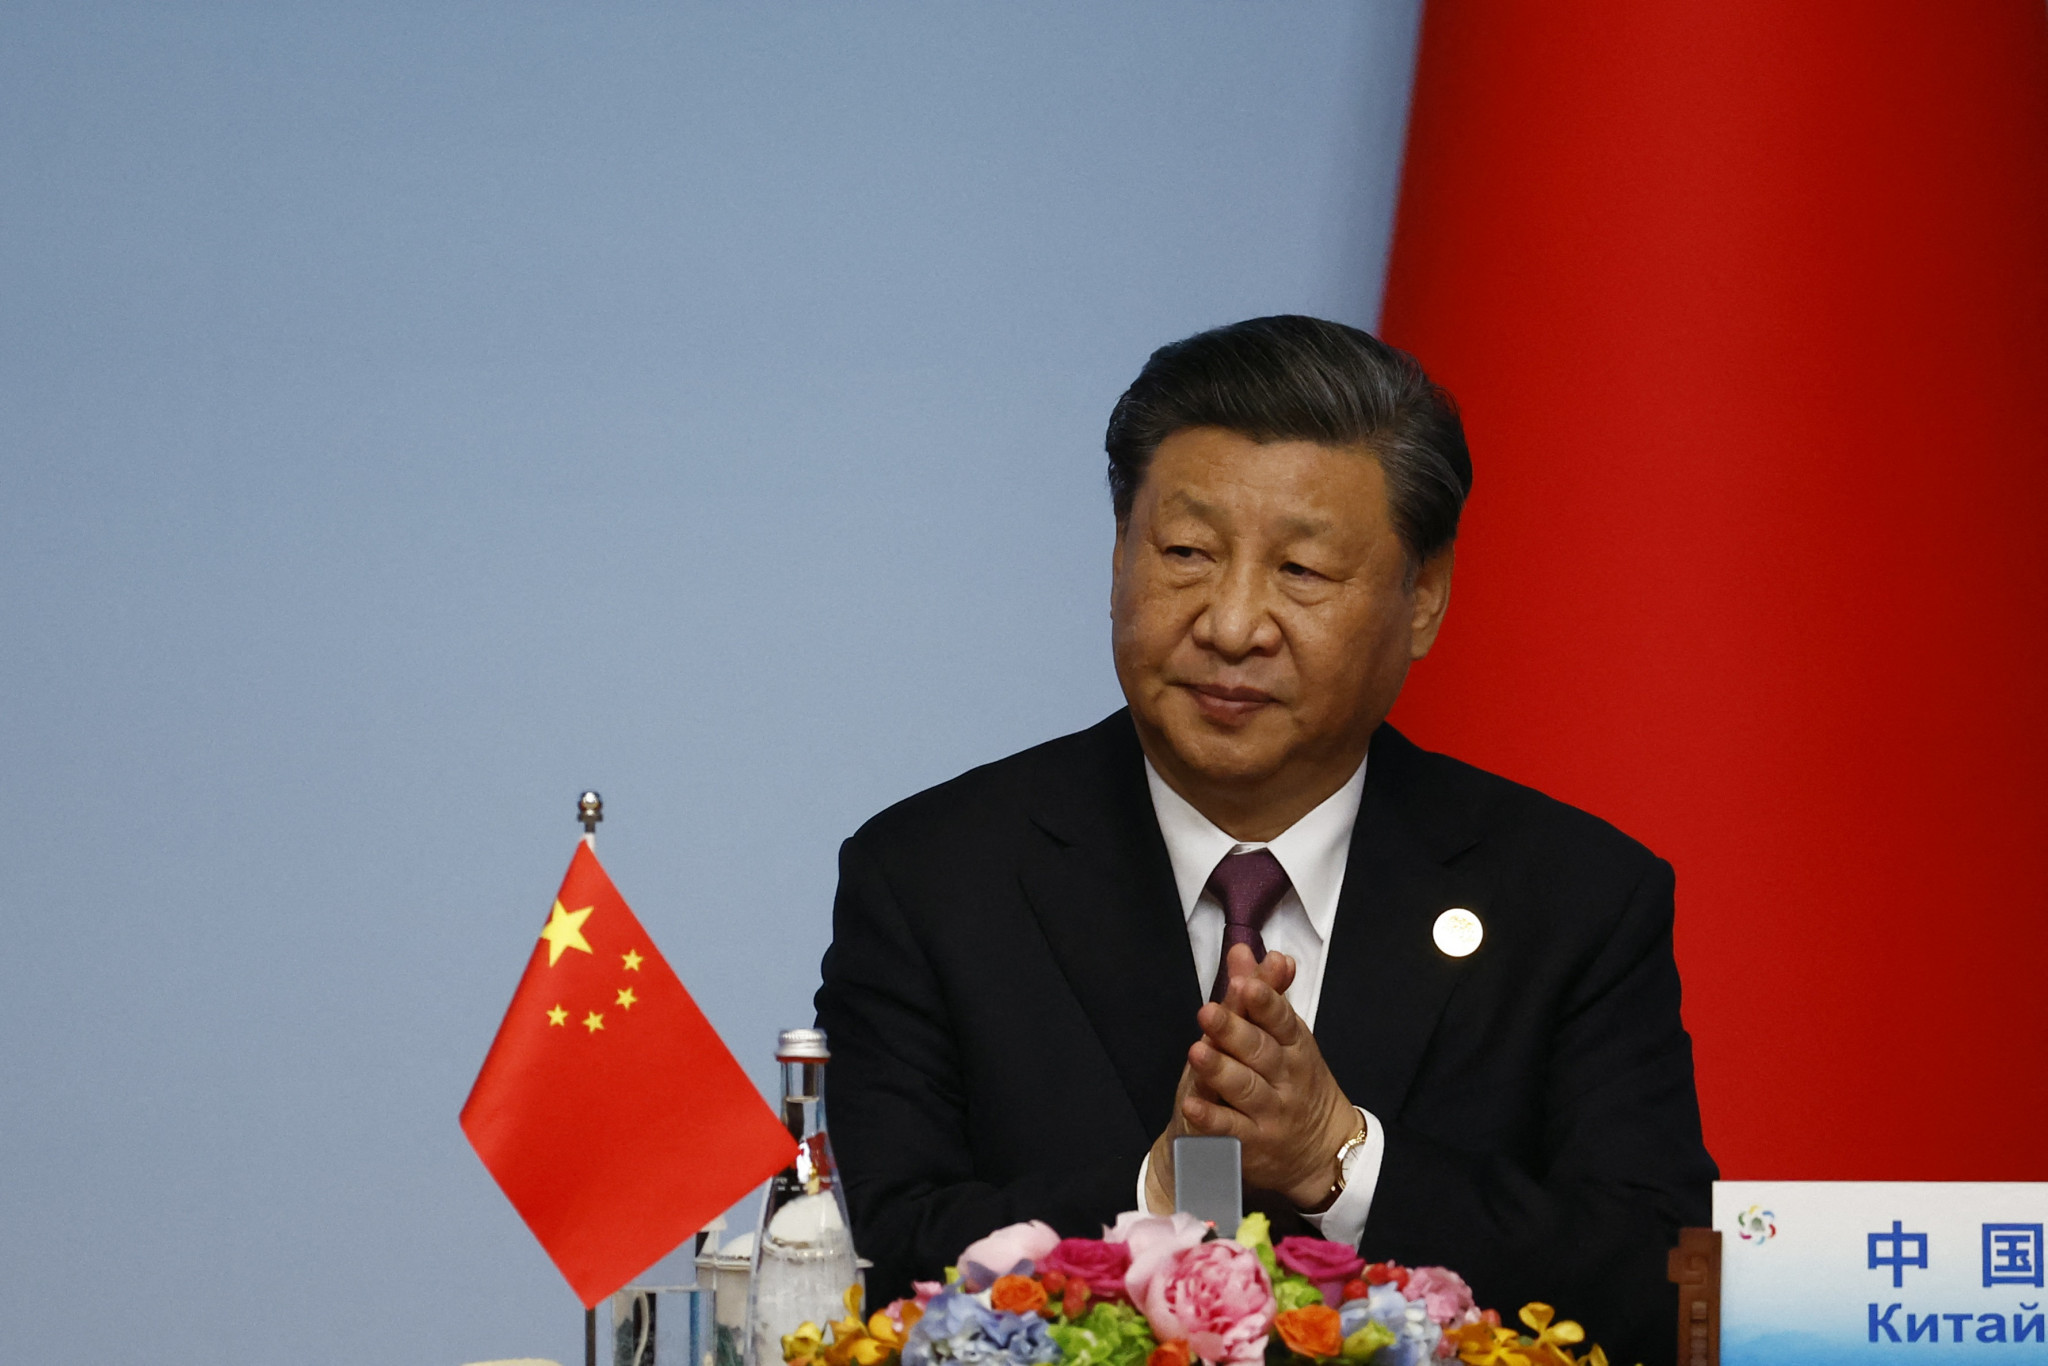 The Chinese Foreign Ministry has announced that the country's leader Xi Jinping will be present for the Opening Ceremony of Chengdu 2021 ©Getty Images